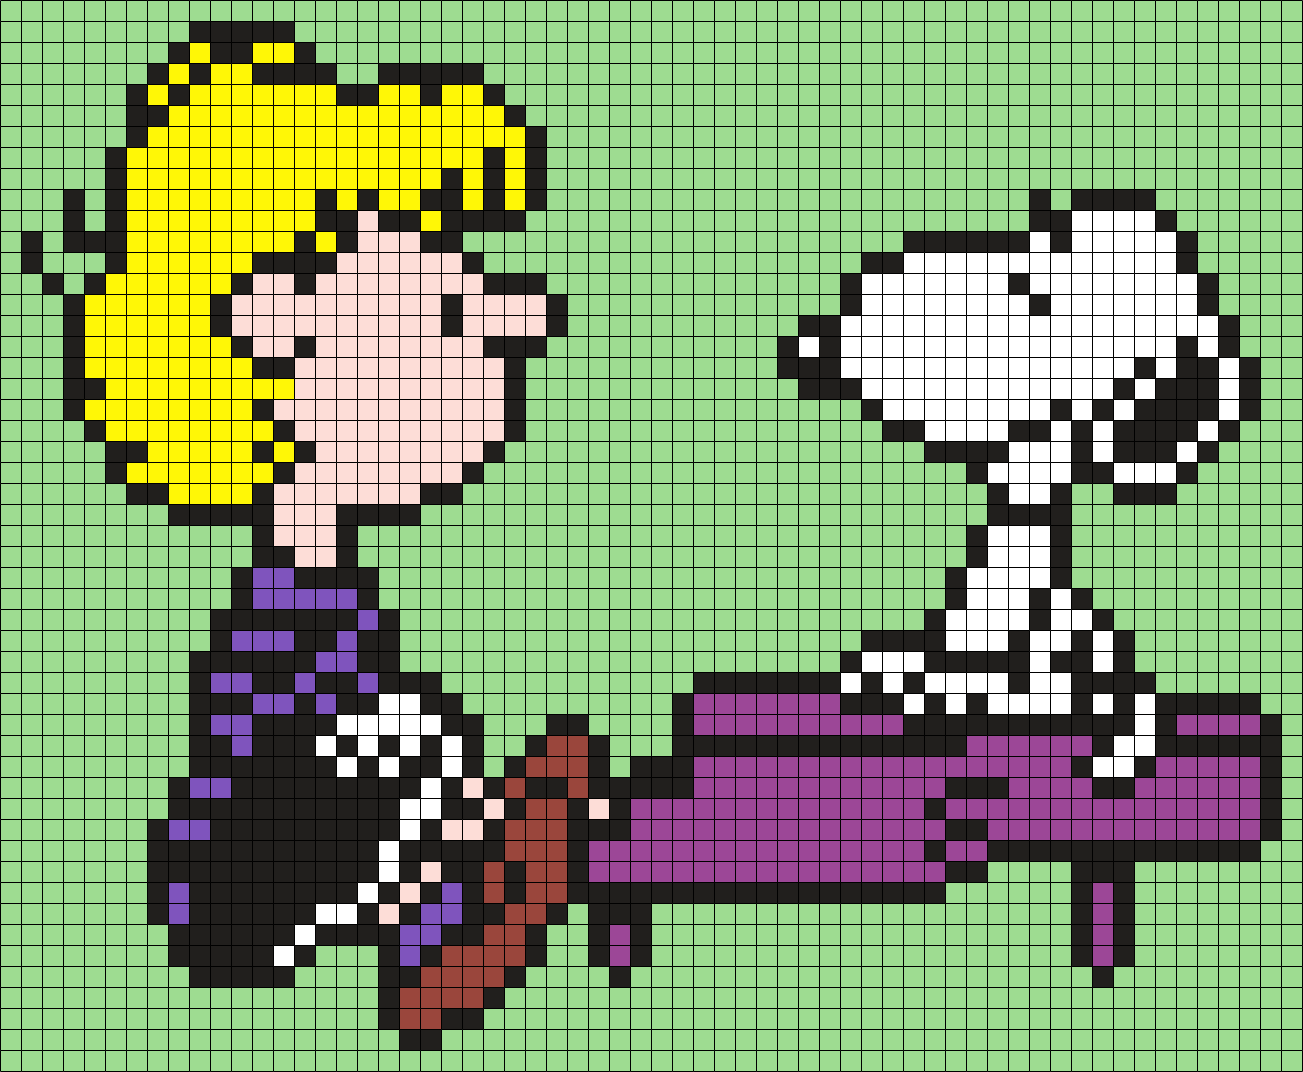 Schroeder And Snoopy From Snoopy And The Peanuts Gang (Square)